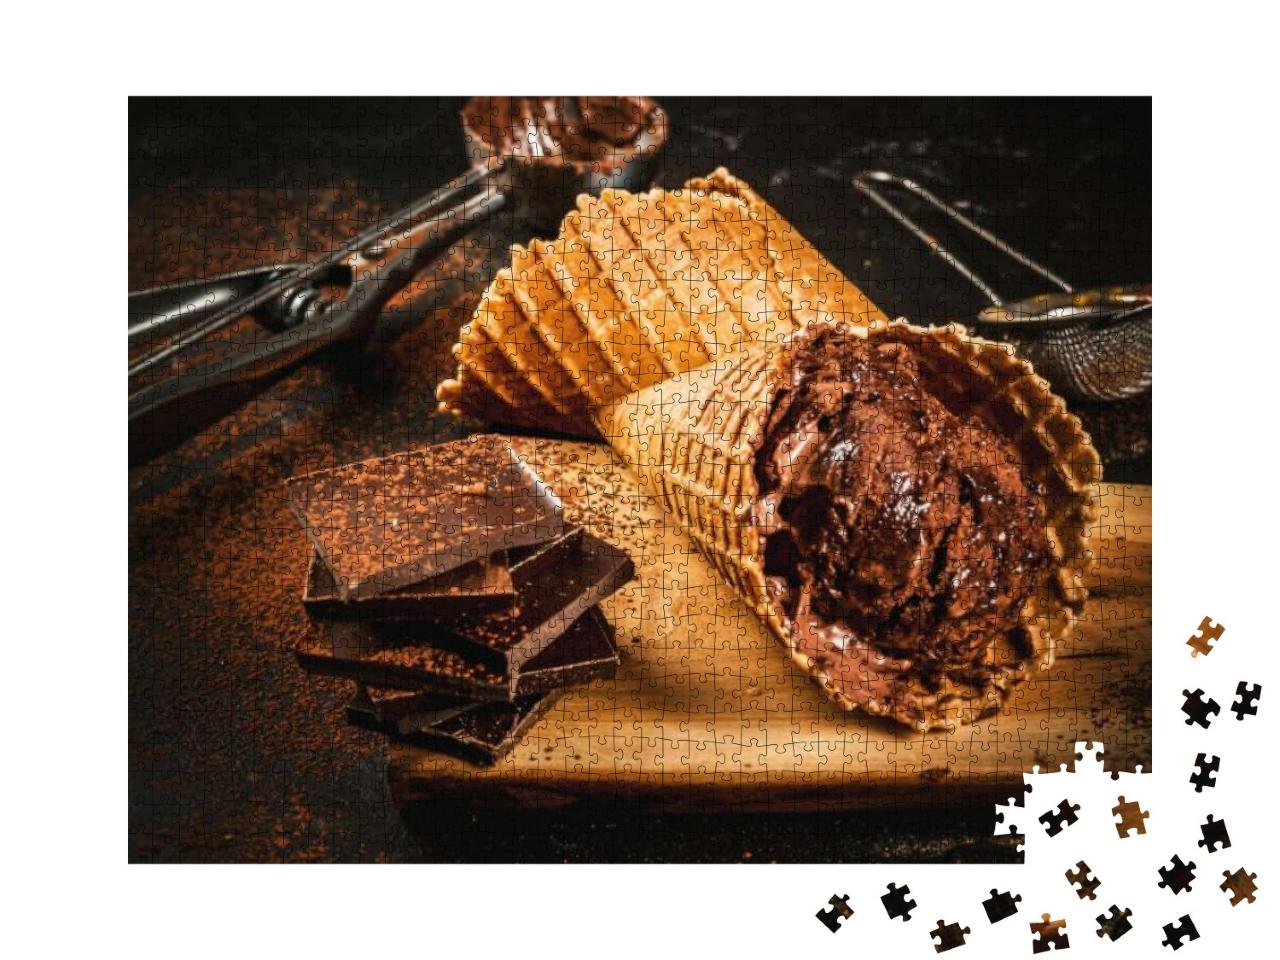 Homemade Chocolate Ice Cream in Waffle Cones, with a Spoo... Jigsaw Puzzle with 1000 pieces